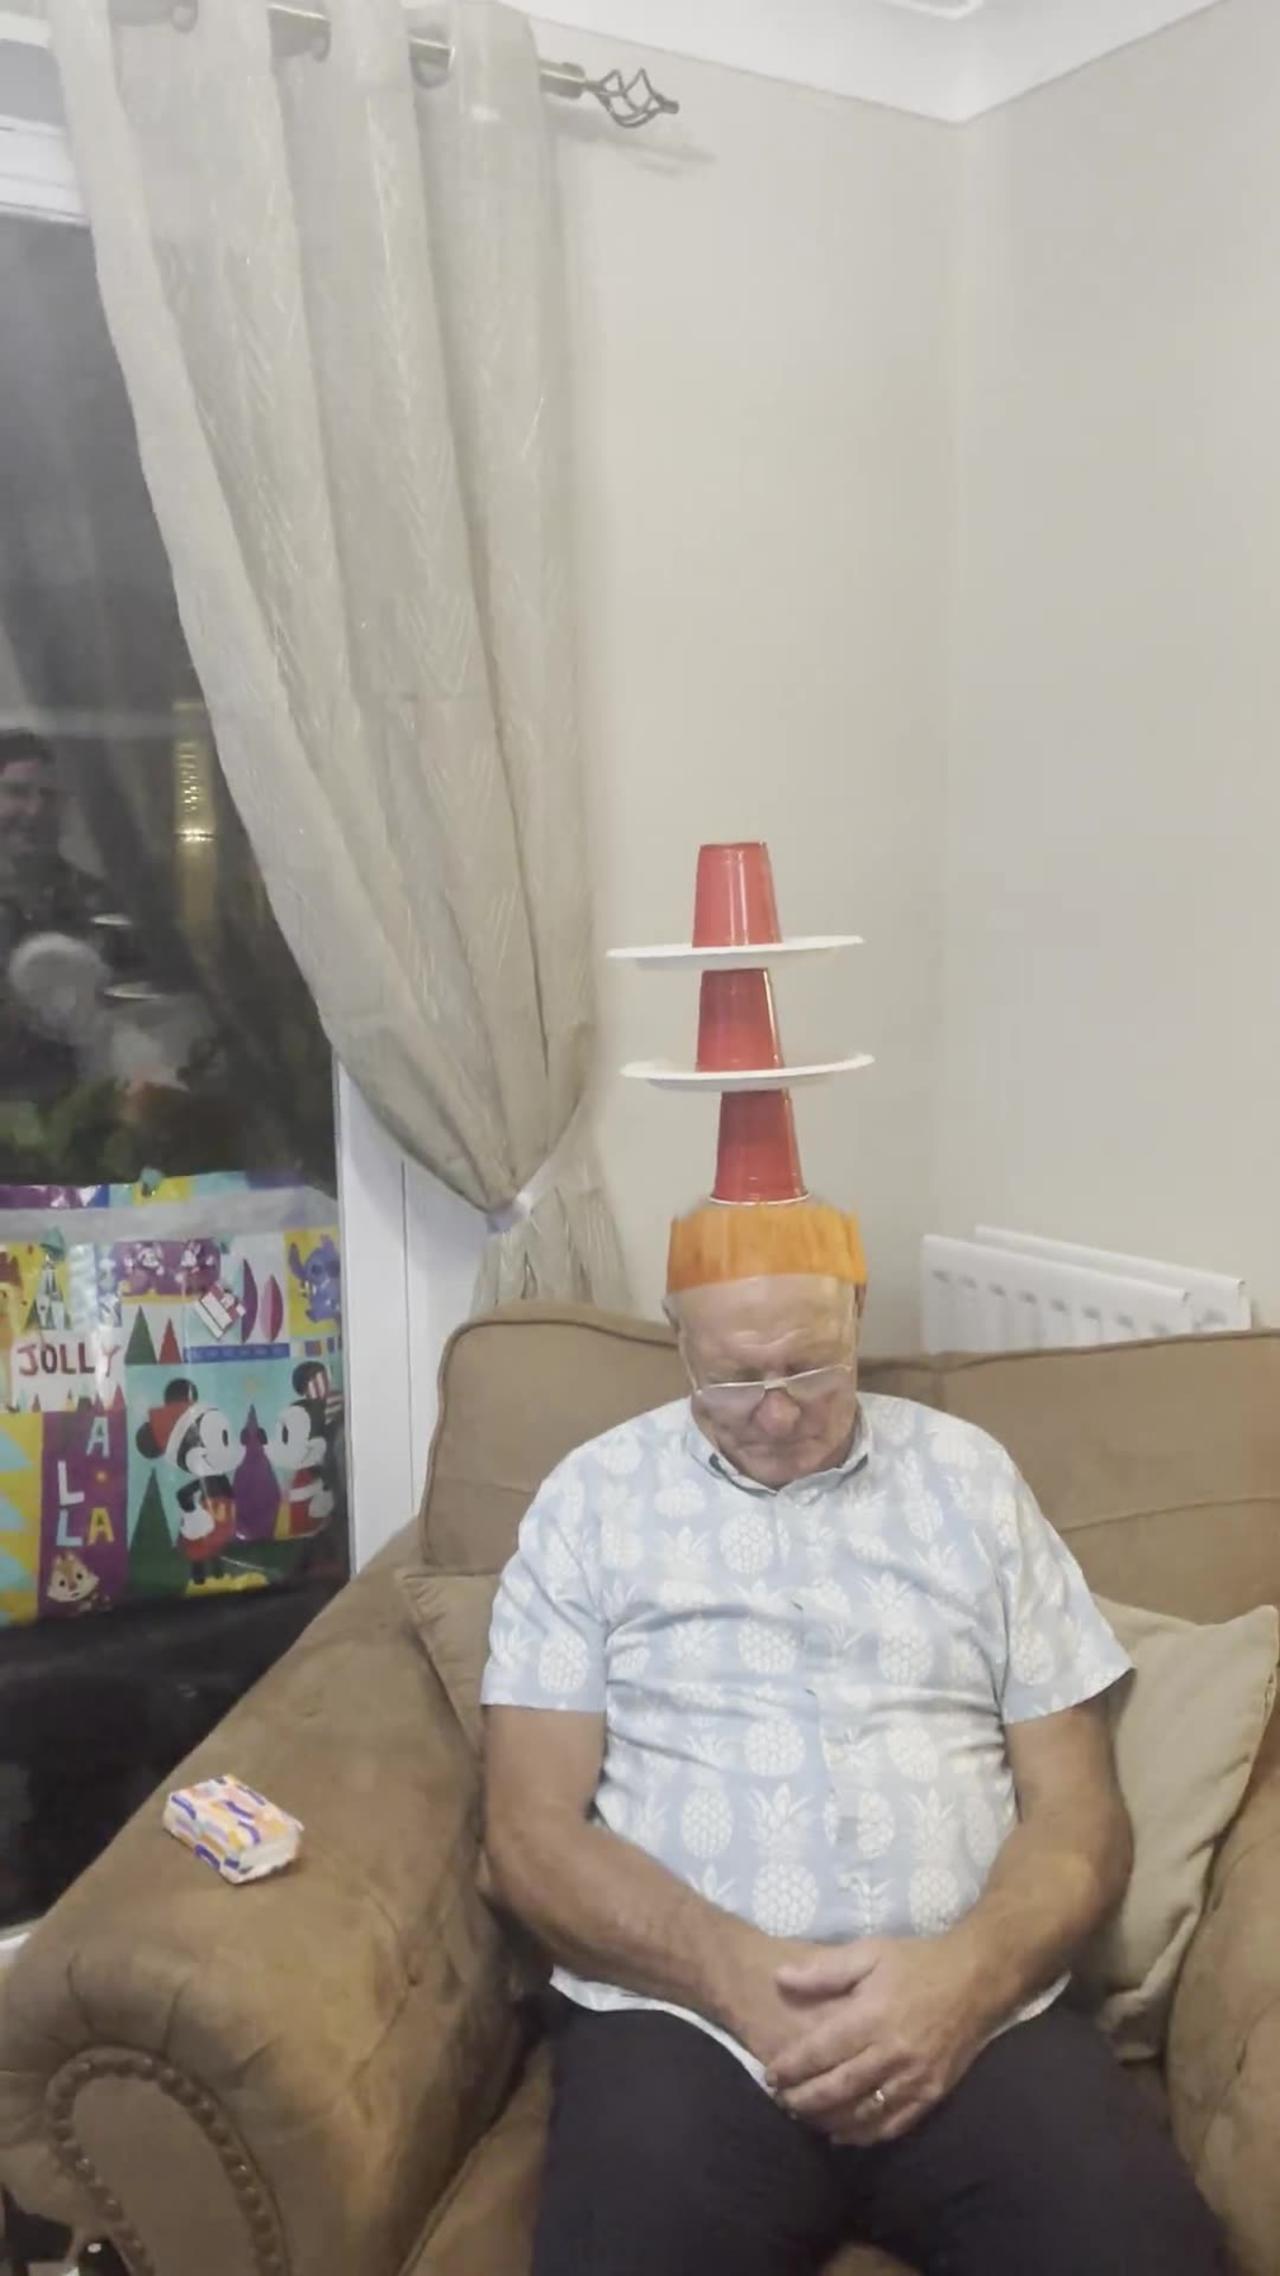 Family Plays a Game on Sleeping Grandpa